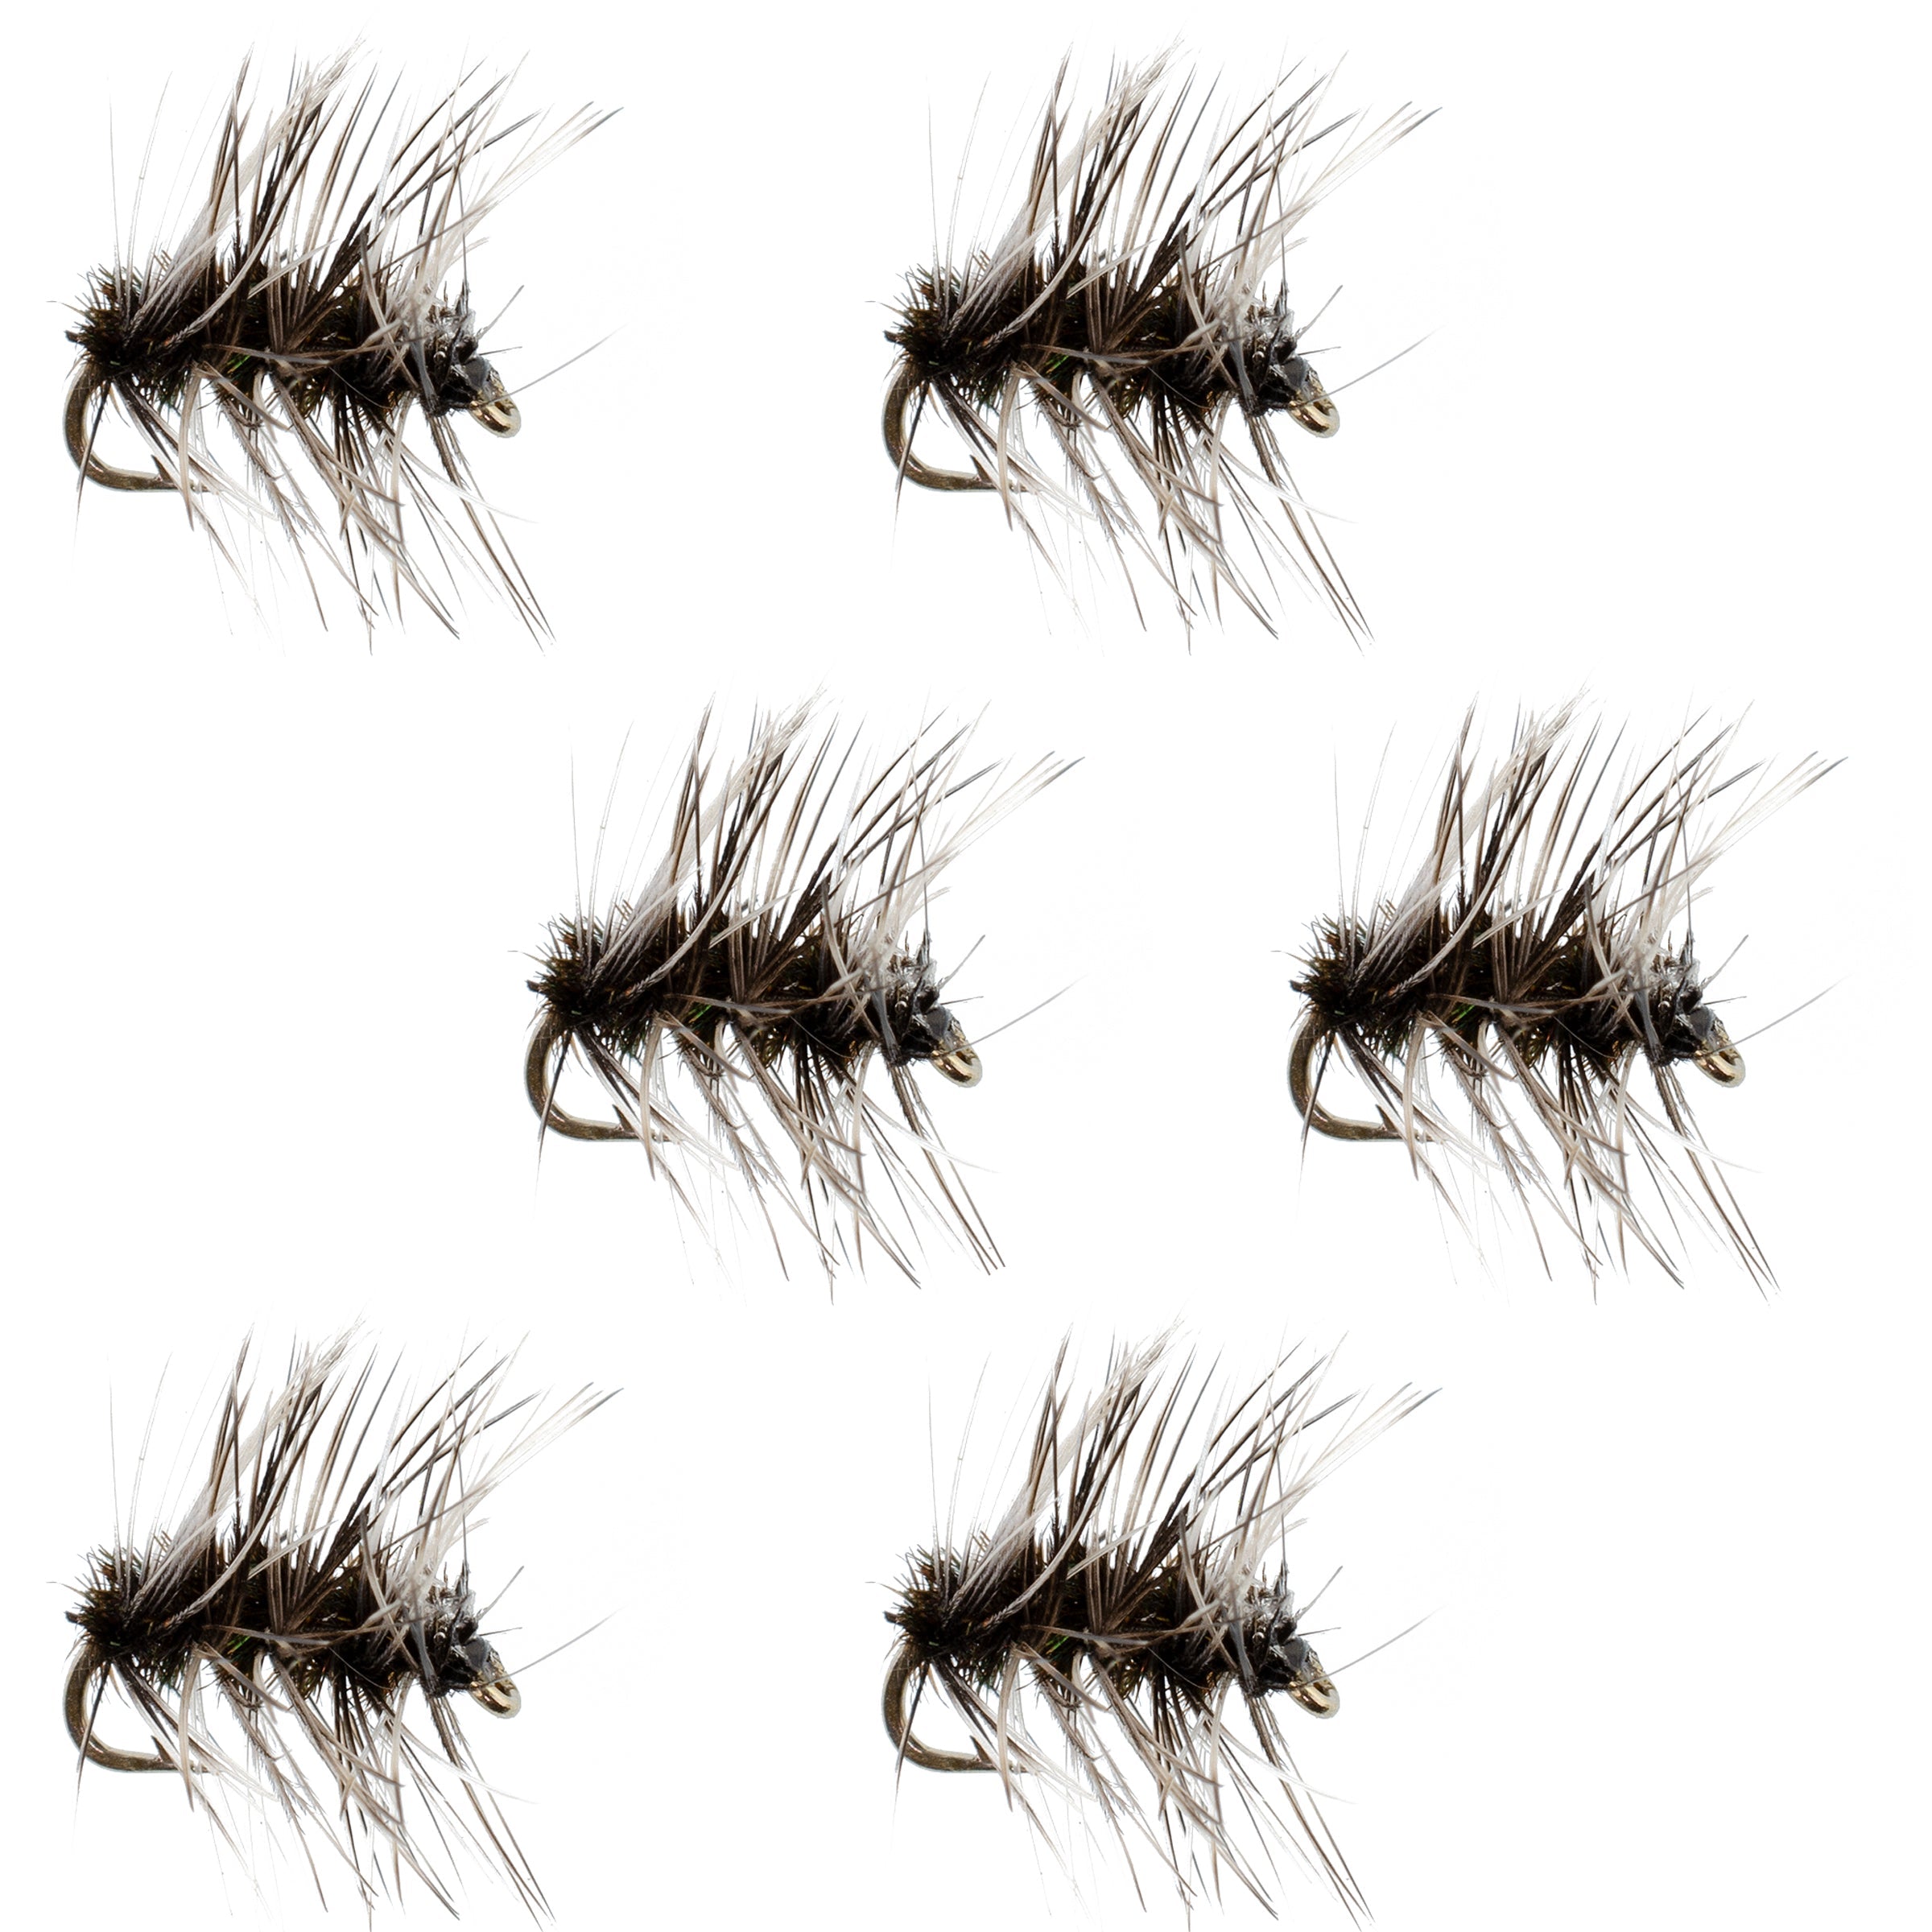 Barbless Griffiths Gnat Midge Trout Dry Fly Fishing Flies - 6 Flies Size 18